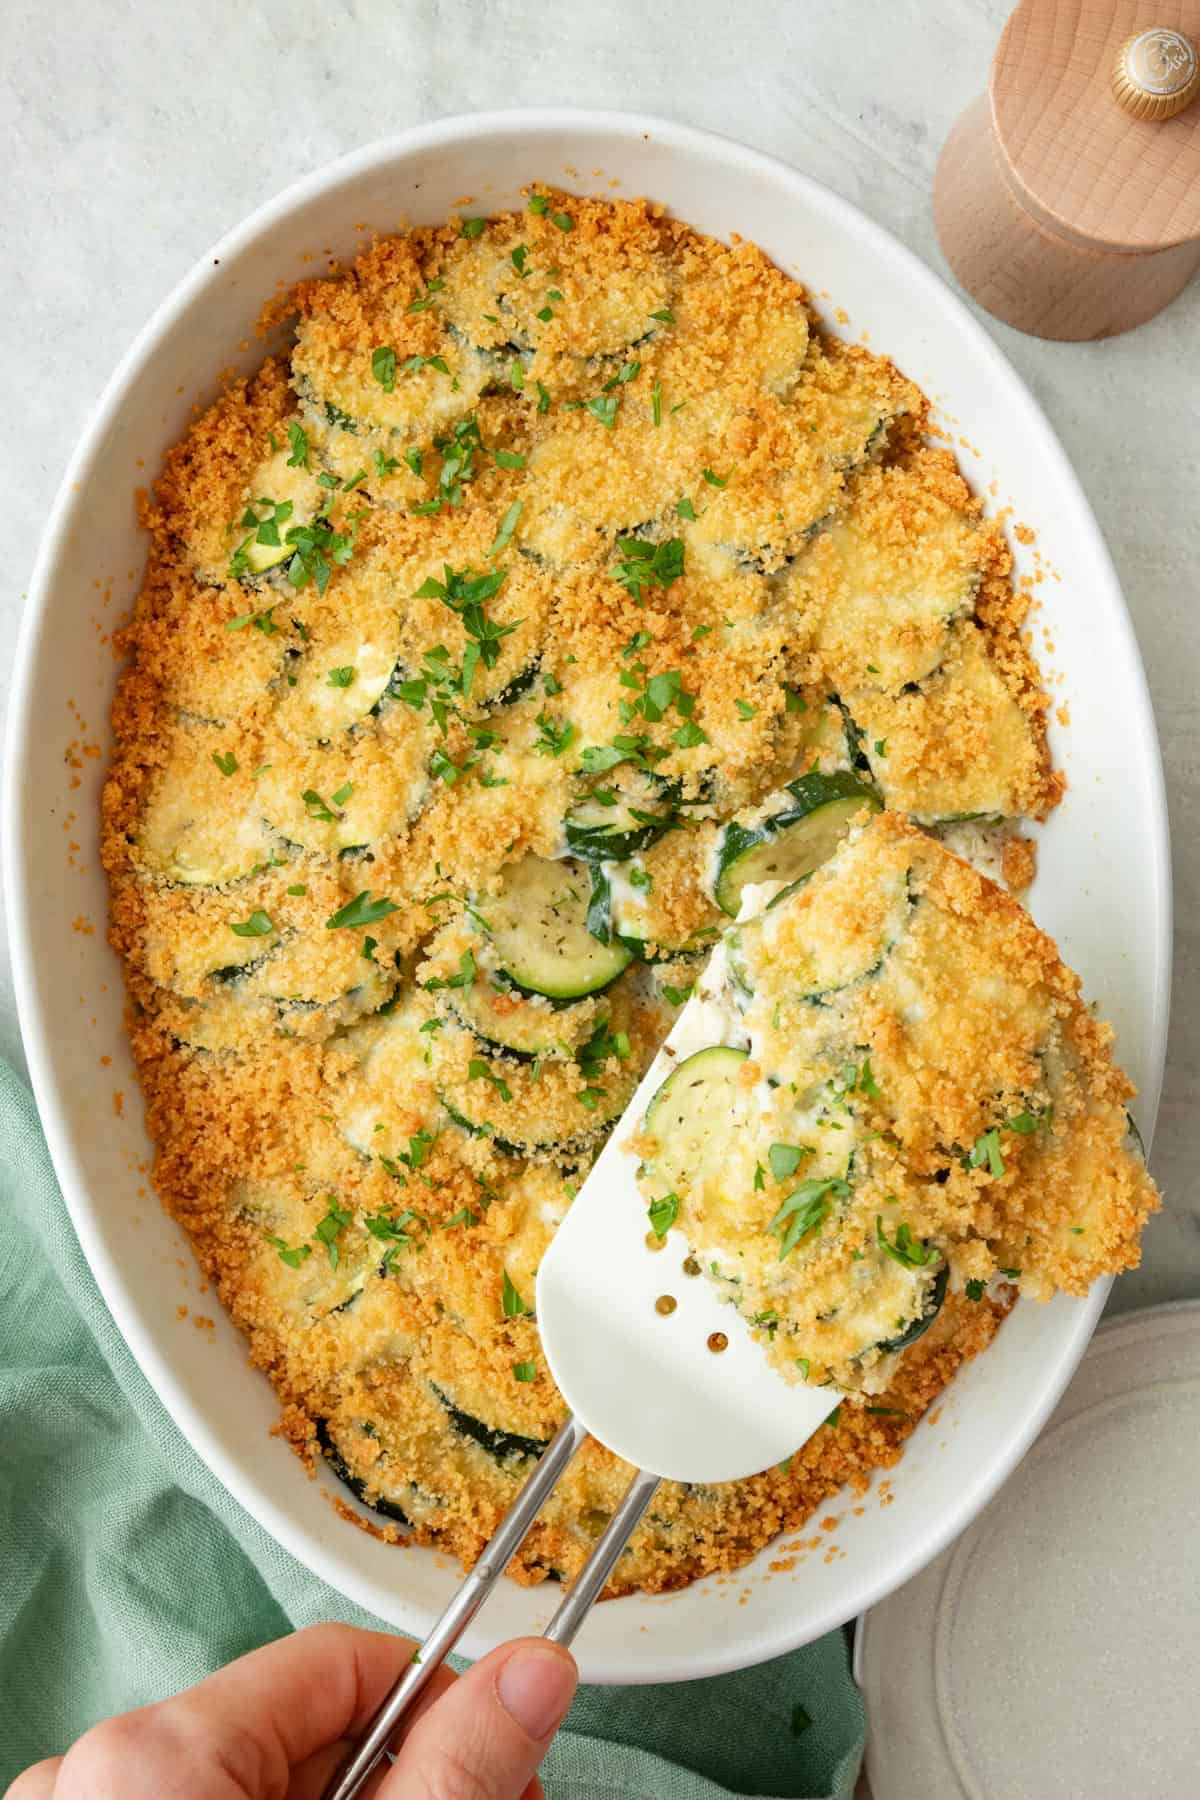 Zucchini casserole in a baking dish with a spatula lifting up a serving.